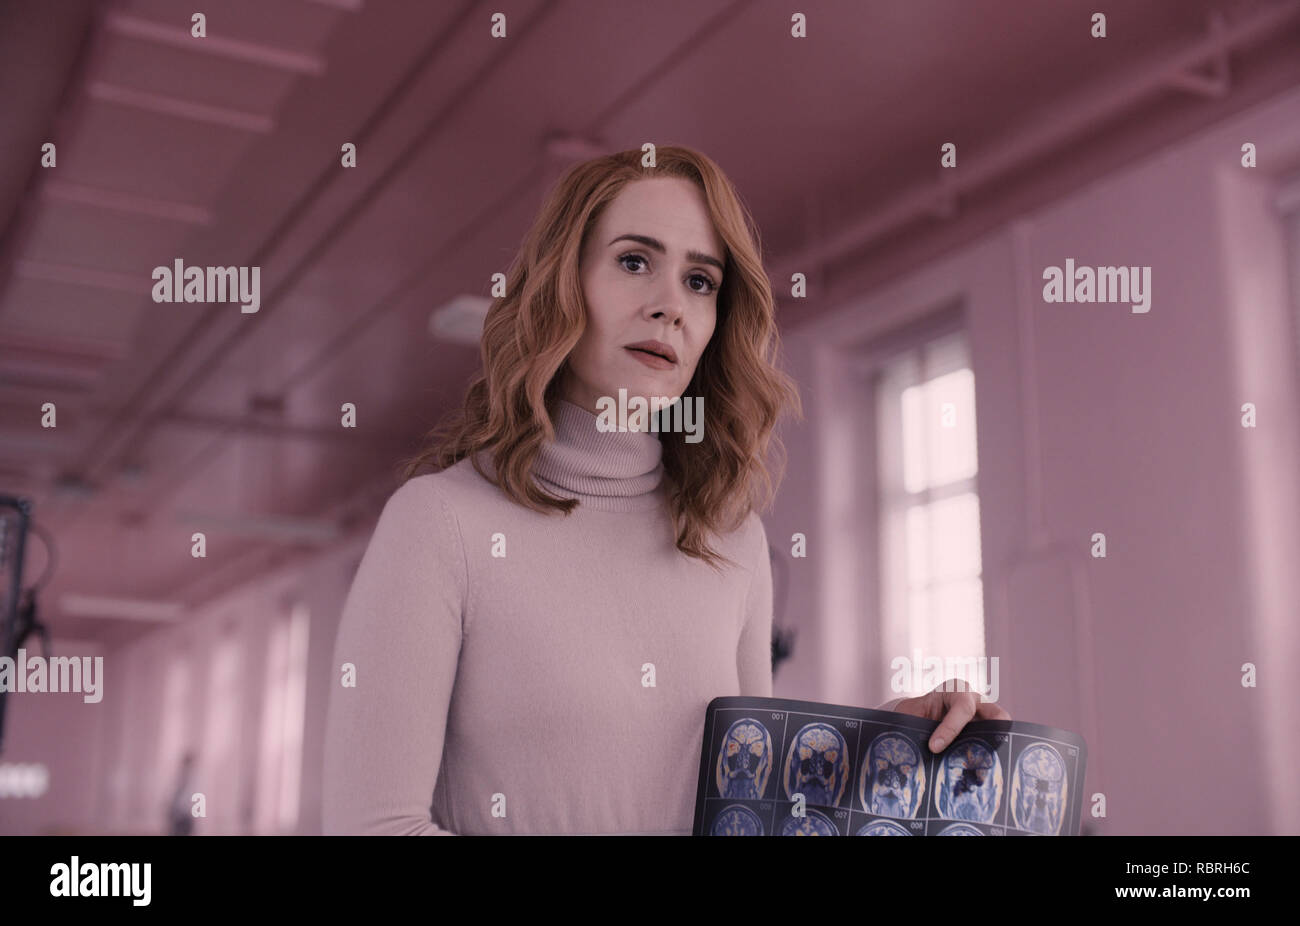 Sarah Paulson as psychiatrist Dr. Ellie Staple in 'Glass,' written and directed by M. Night Shyamalan. Photo Credit: Universal Pictures / The Hollywood Archive Stock Photo